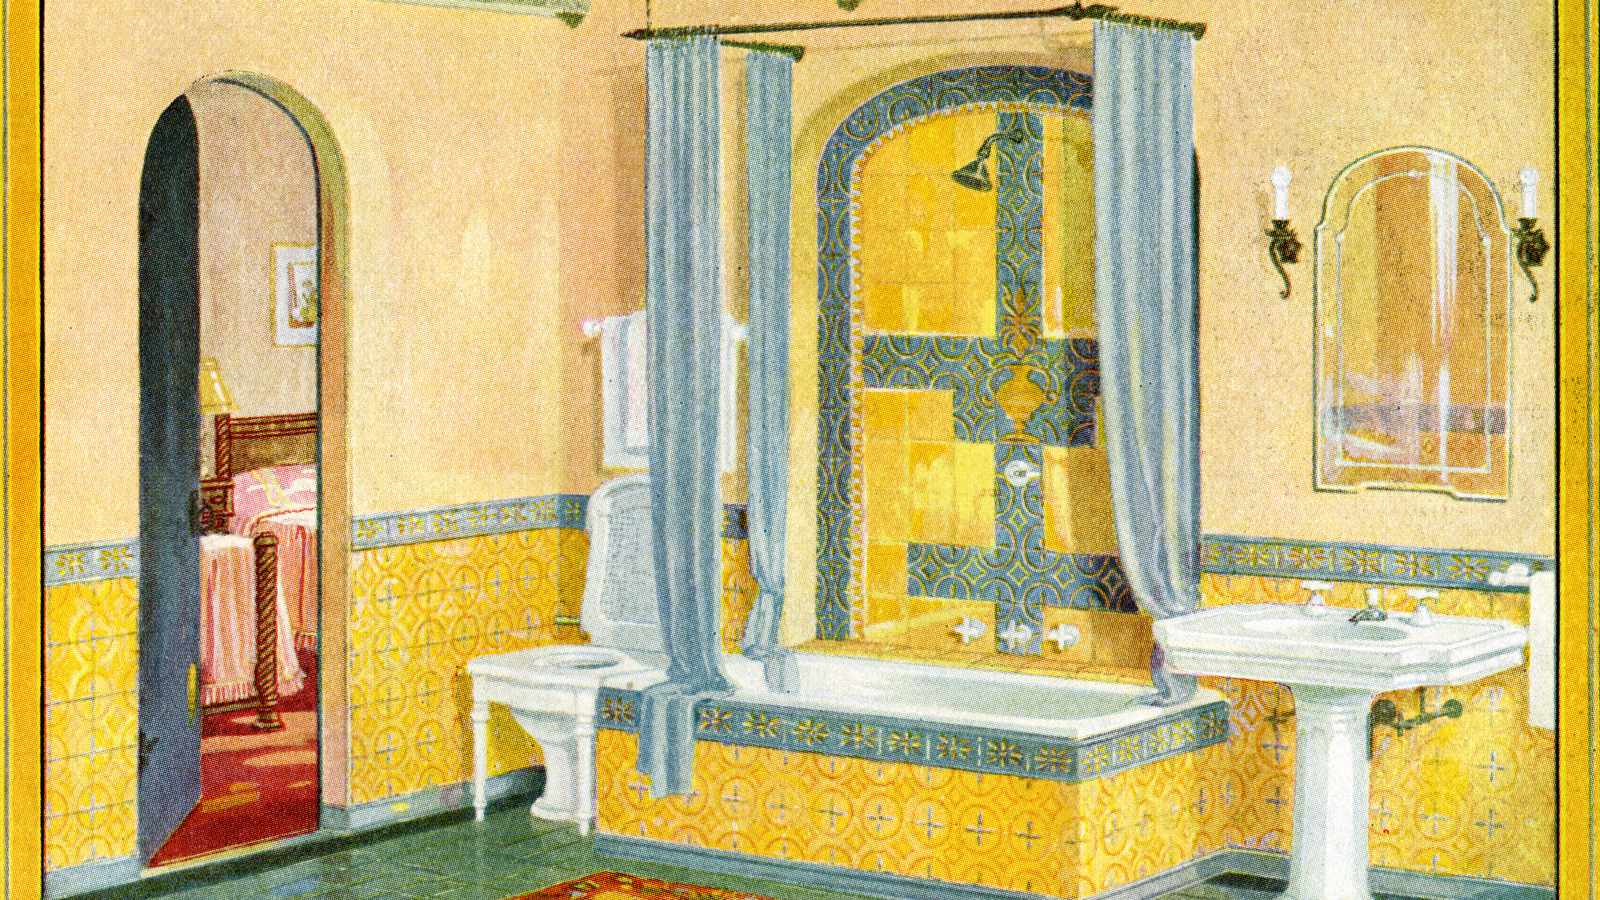 https://www.housedigest.com/img/gallery/40-art-deco-inspired-bathrooms-thatll-take-you-back-to-the-roaring-20s/l-intro-1657291277.jpg